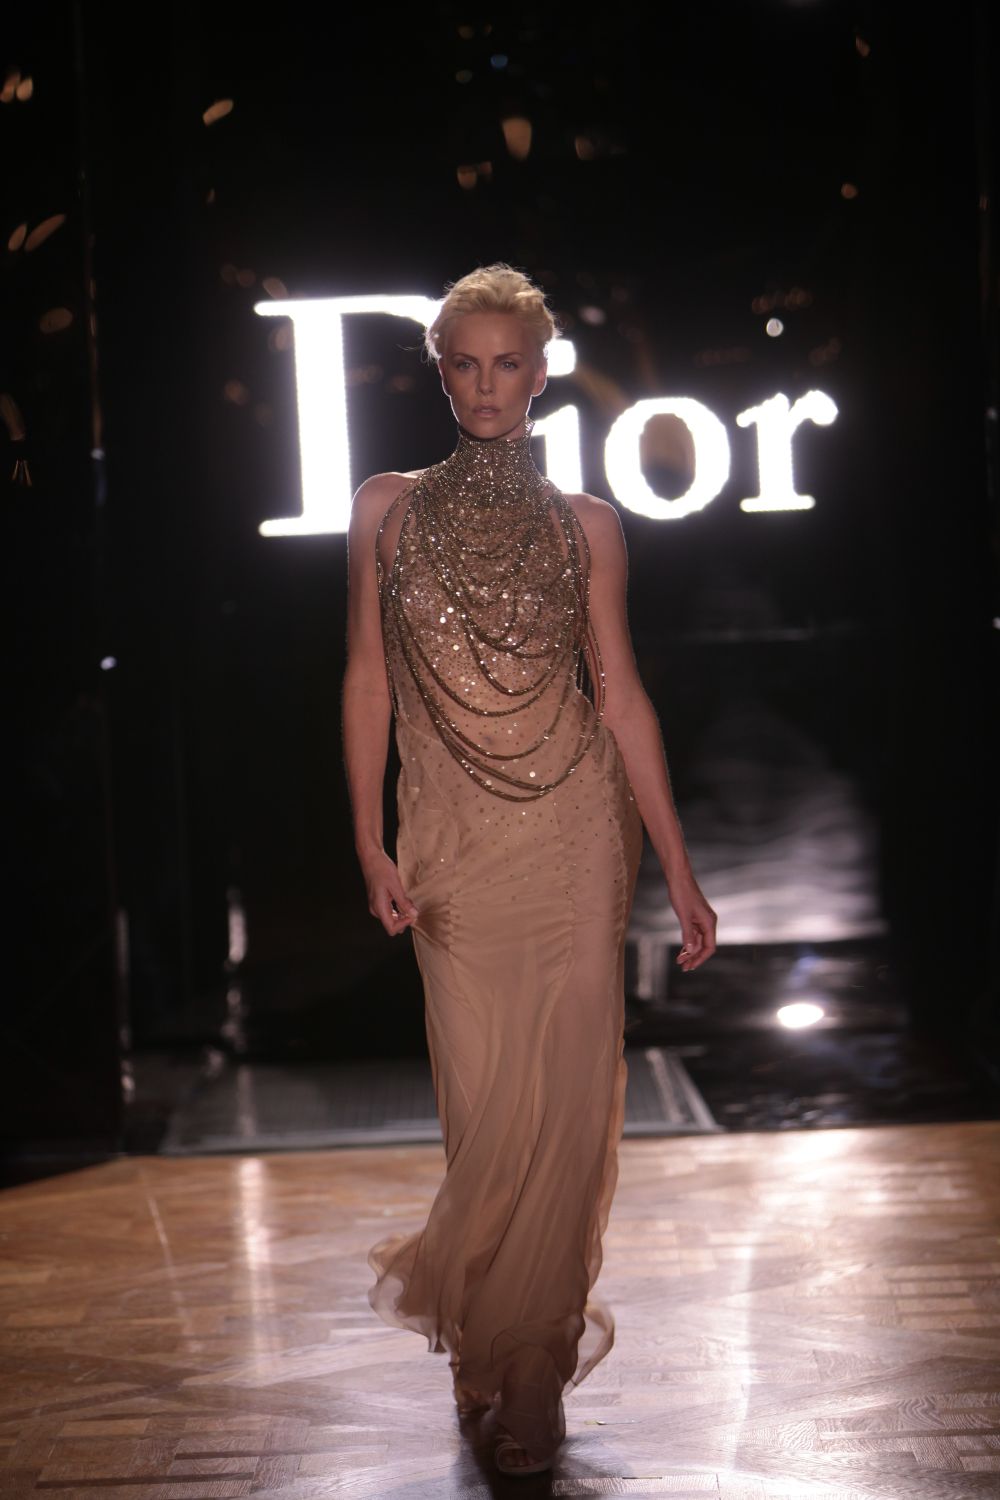 dior new campaign jadore Charlize Theron_04.